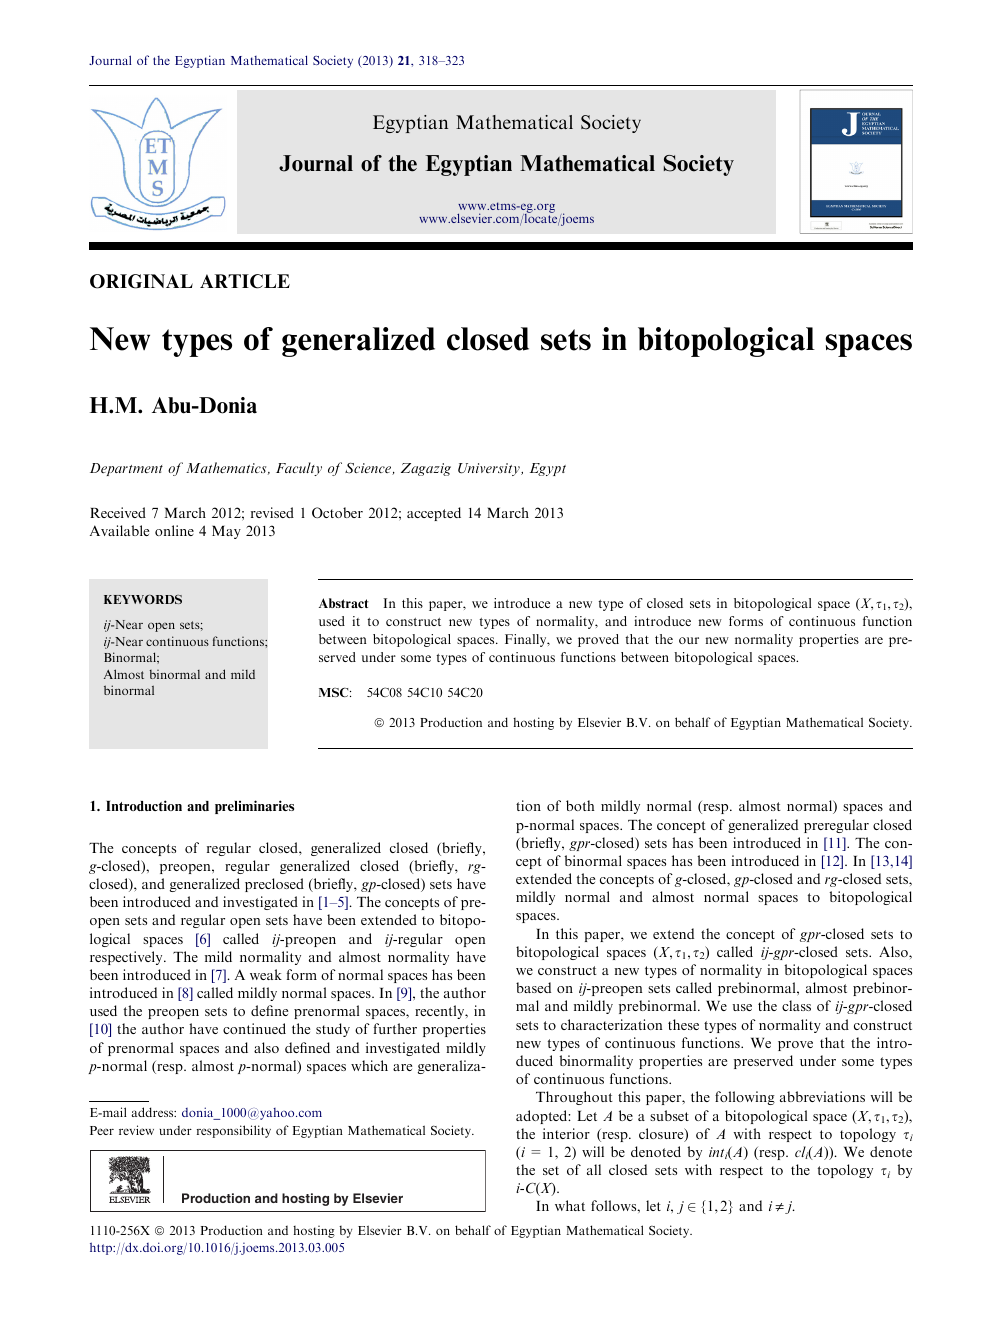 New Types Of Generalized Closed Sets In Bitopological Spaces Topic Of Research Paper In Mathematics Download Scholarly Article Pdf And Read For Free On Cyberleninka Open Science Hub